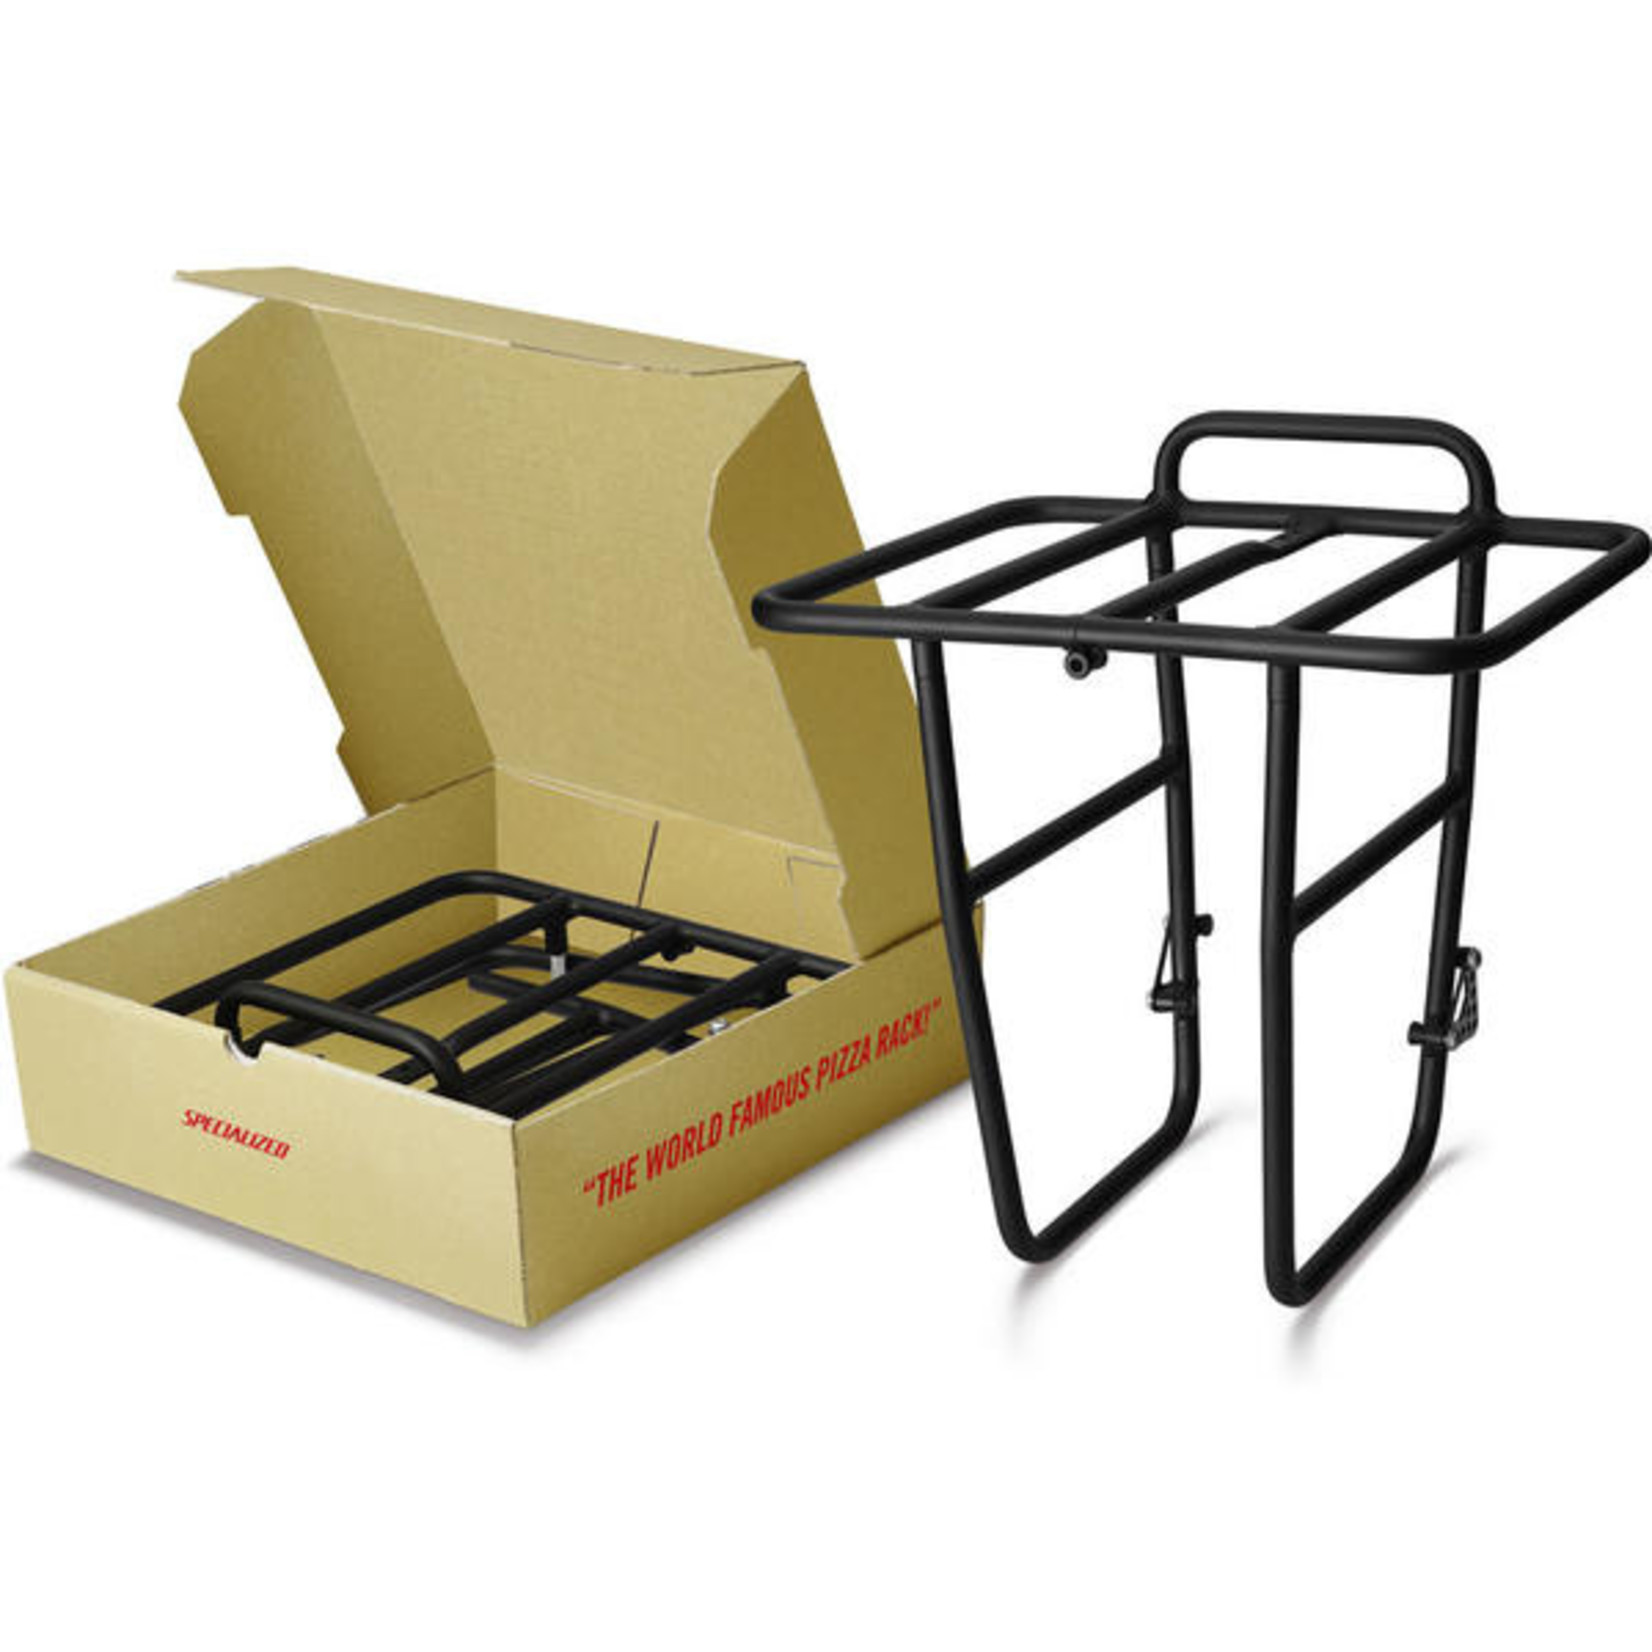 Specialized PIZZA FRONT RACK 700C - Black